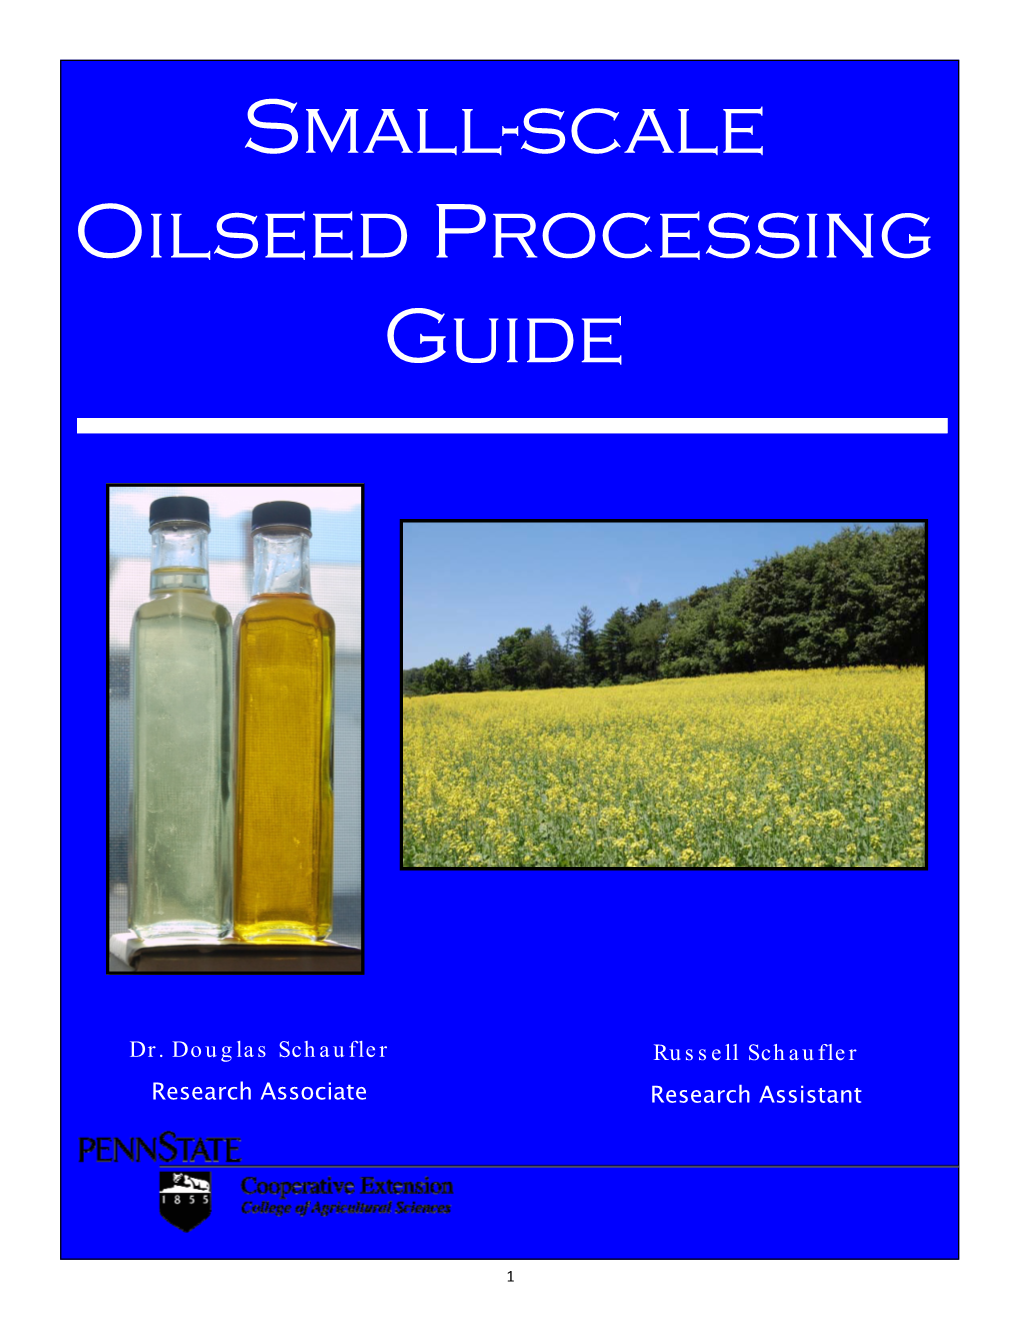 Small-Scale Oilseed Processing Guide